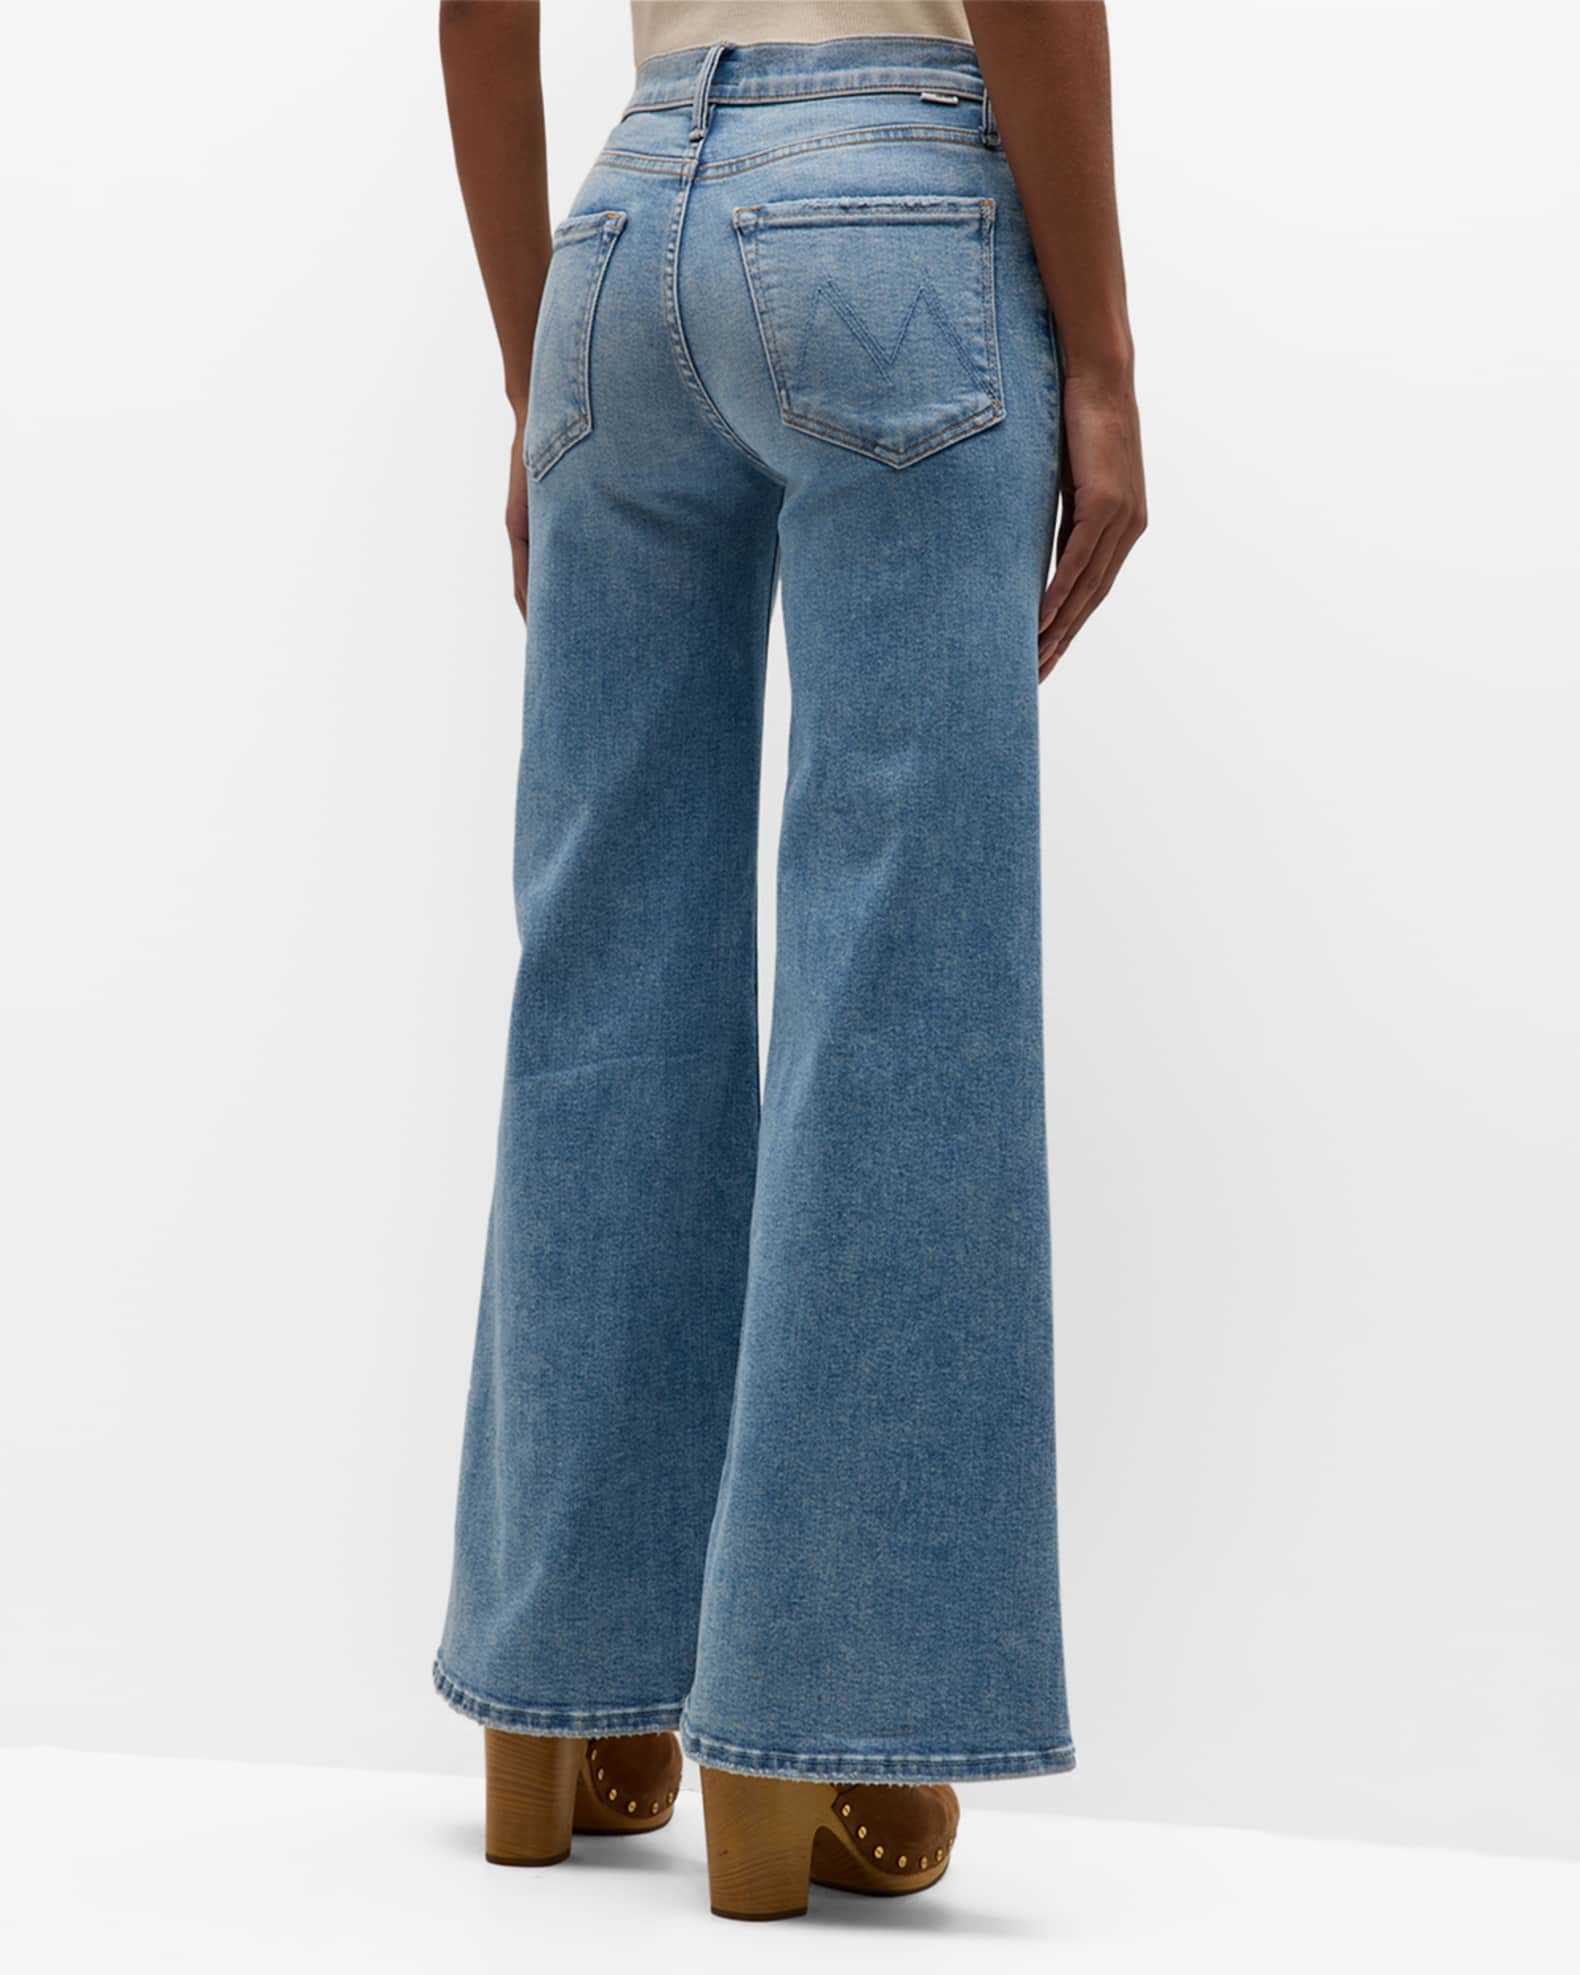 MOTHER The Twister Skimp Jeans | Neiman Marcus